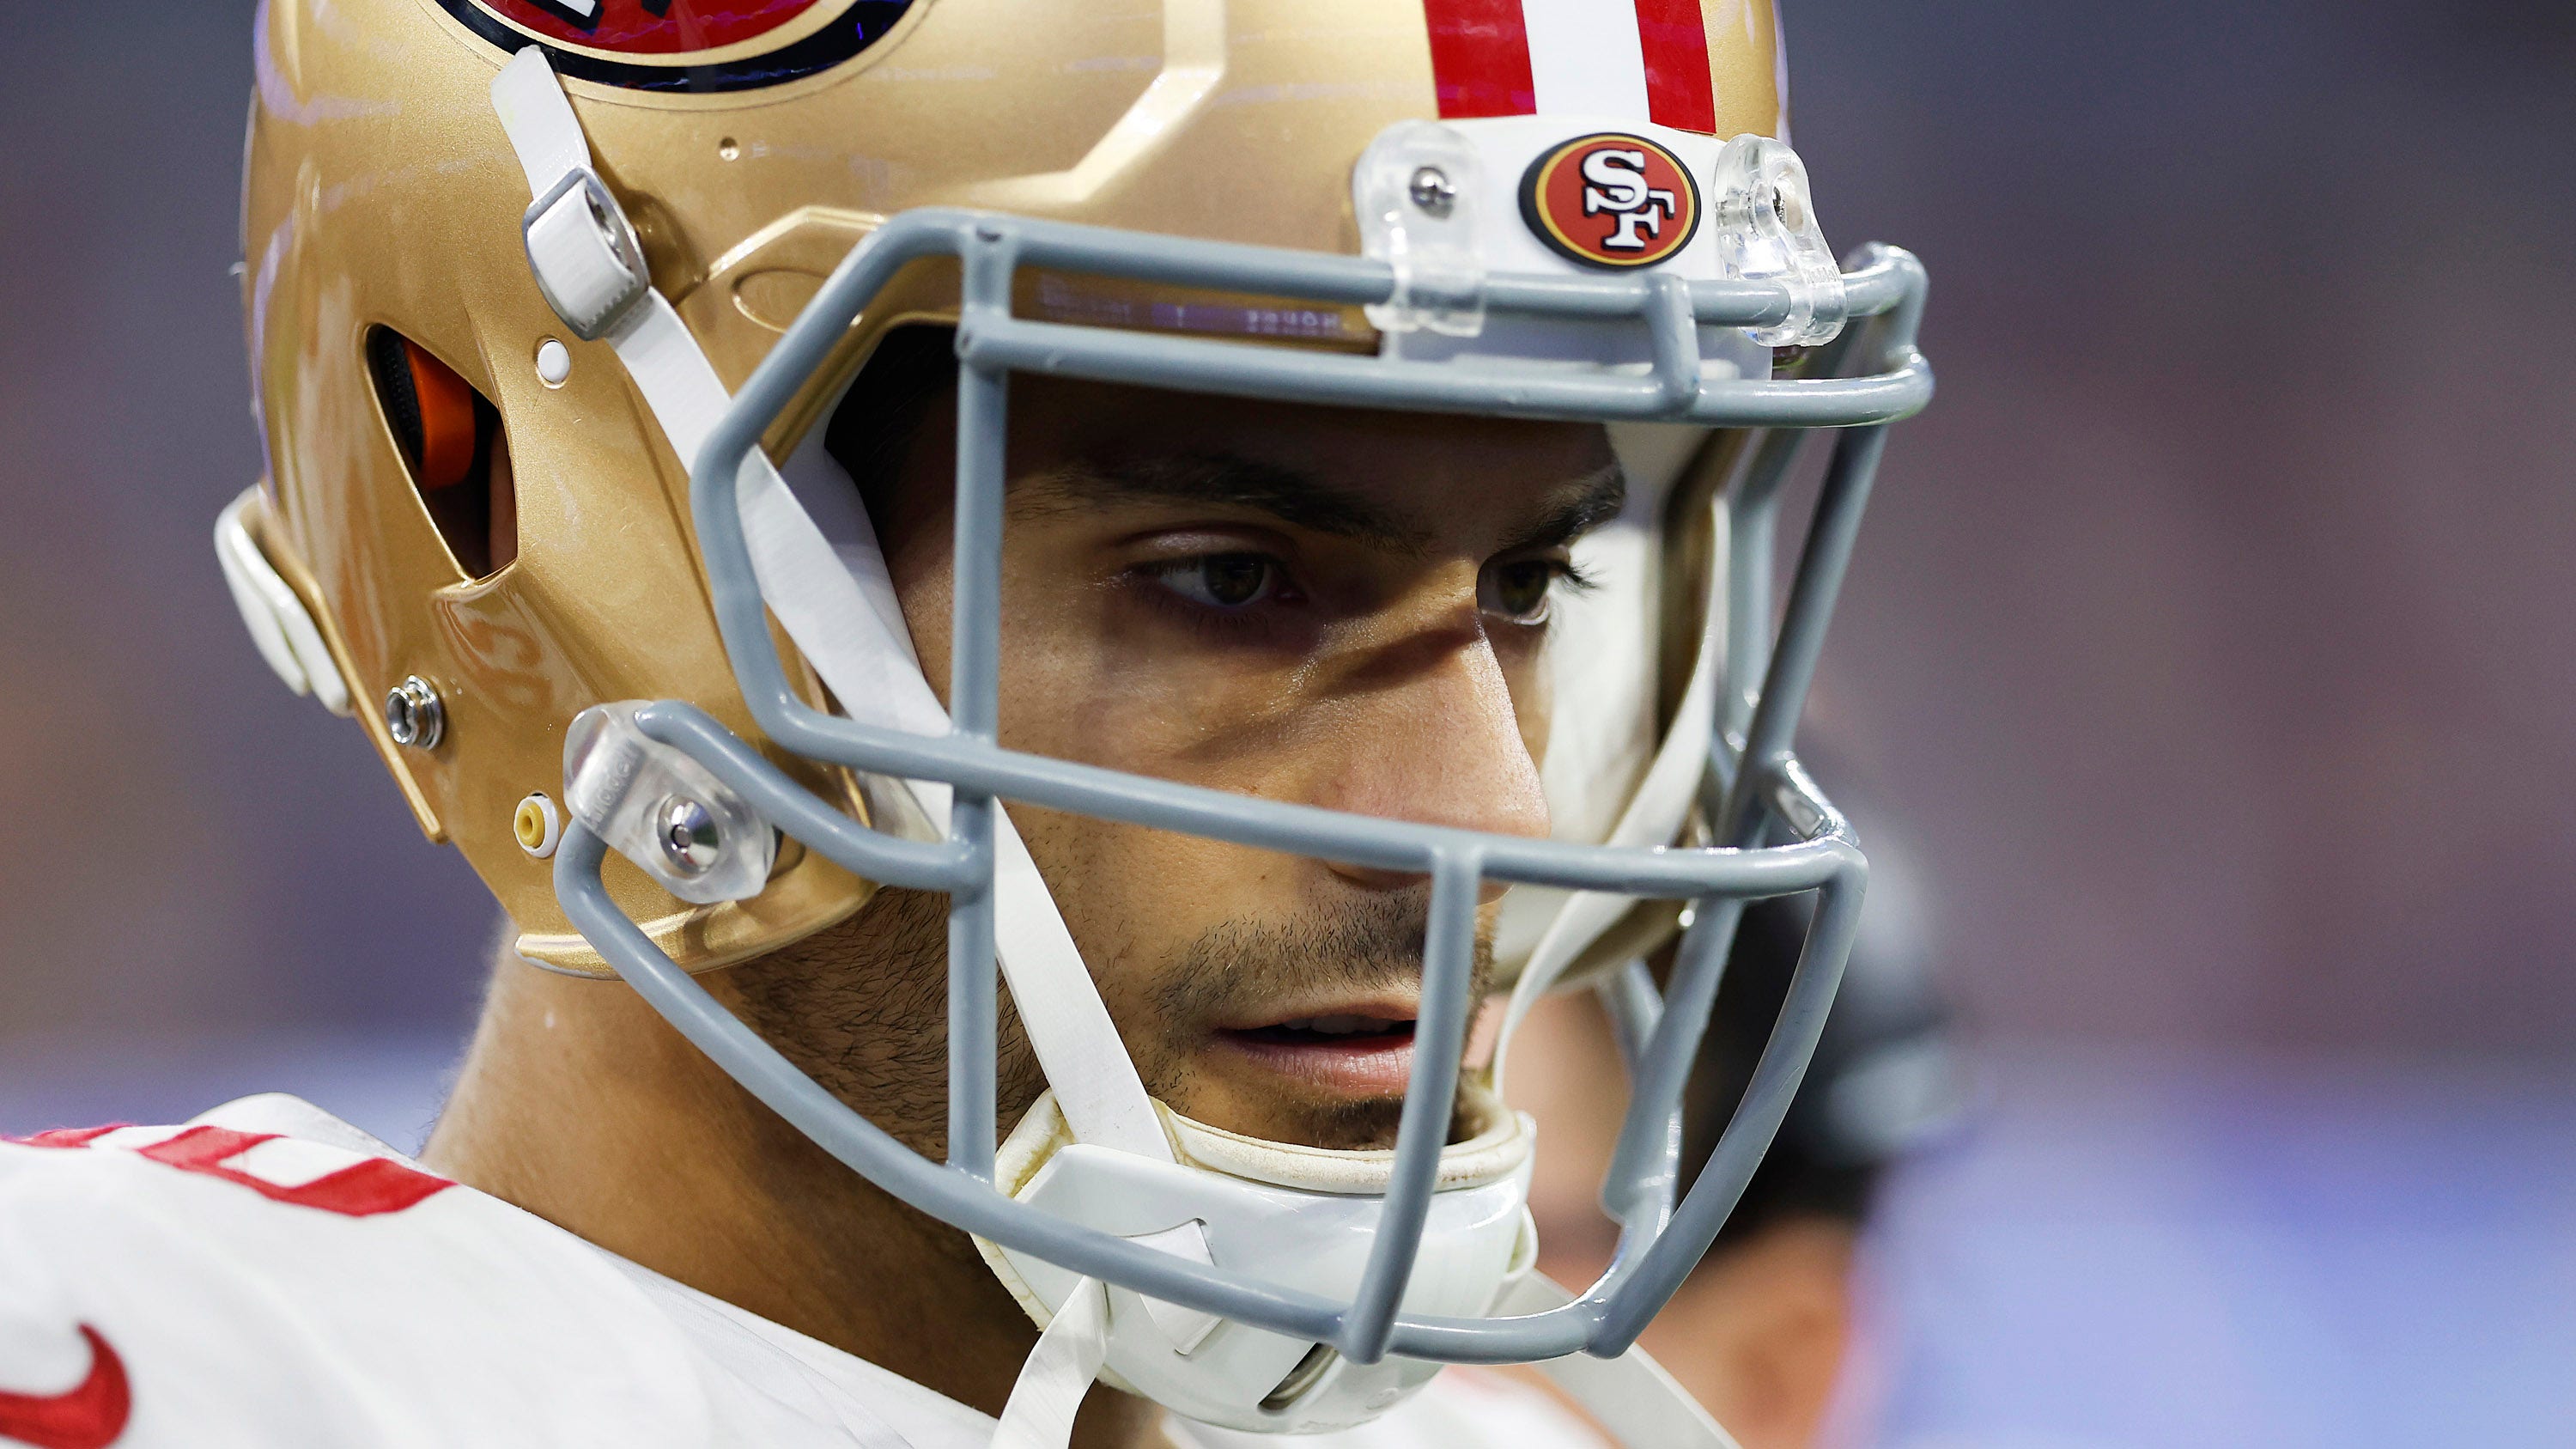 The%20Niners%20will%20need%20a%20lot%20of%20help%20from%20their%20quarterback%2C%20who%20has%20yet%20to%20be%20fully%20utilized%20in%20this%20game